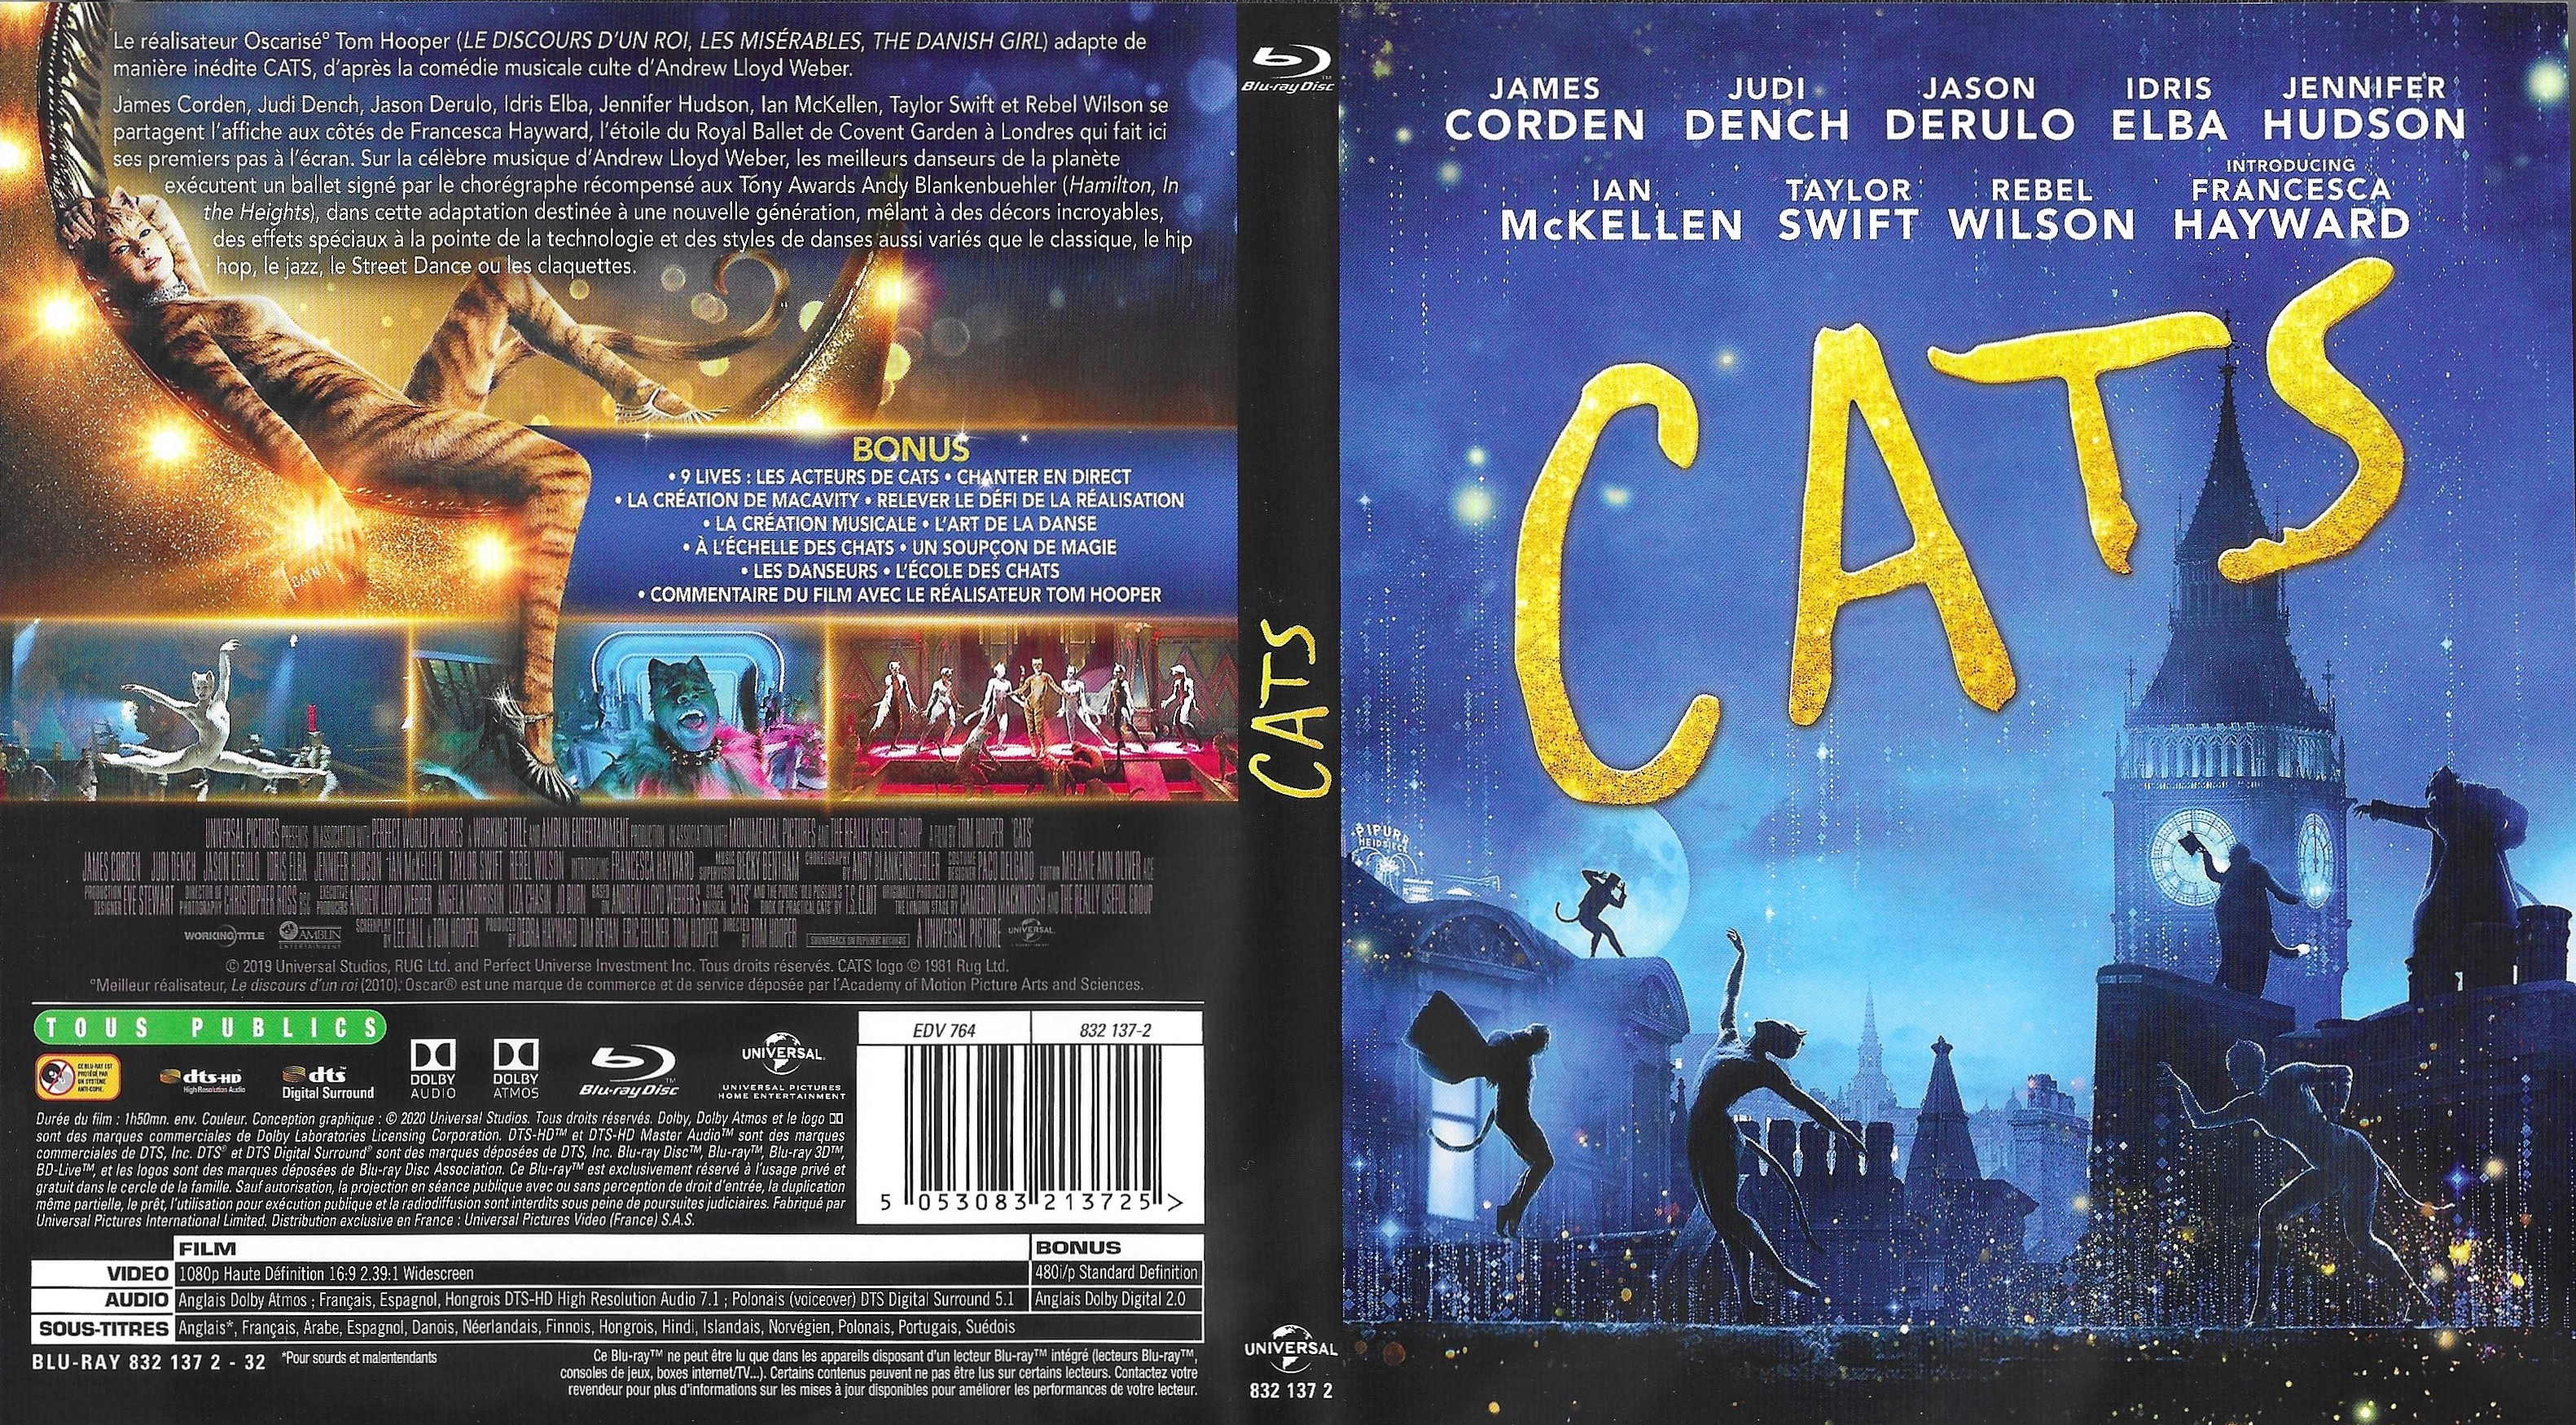 Jaquette DVD Cats (BLU-RAY)